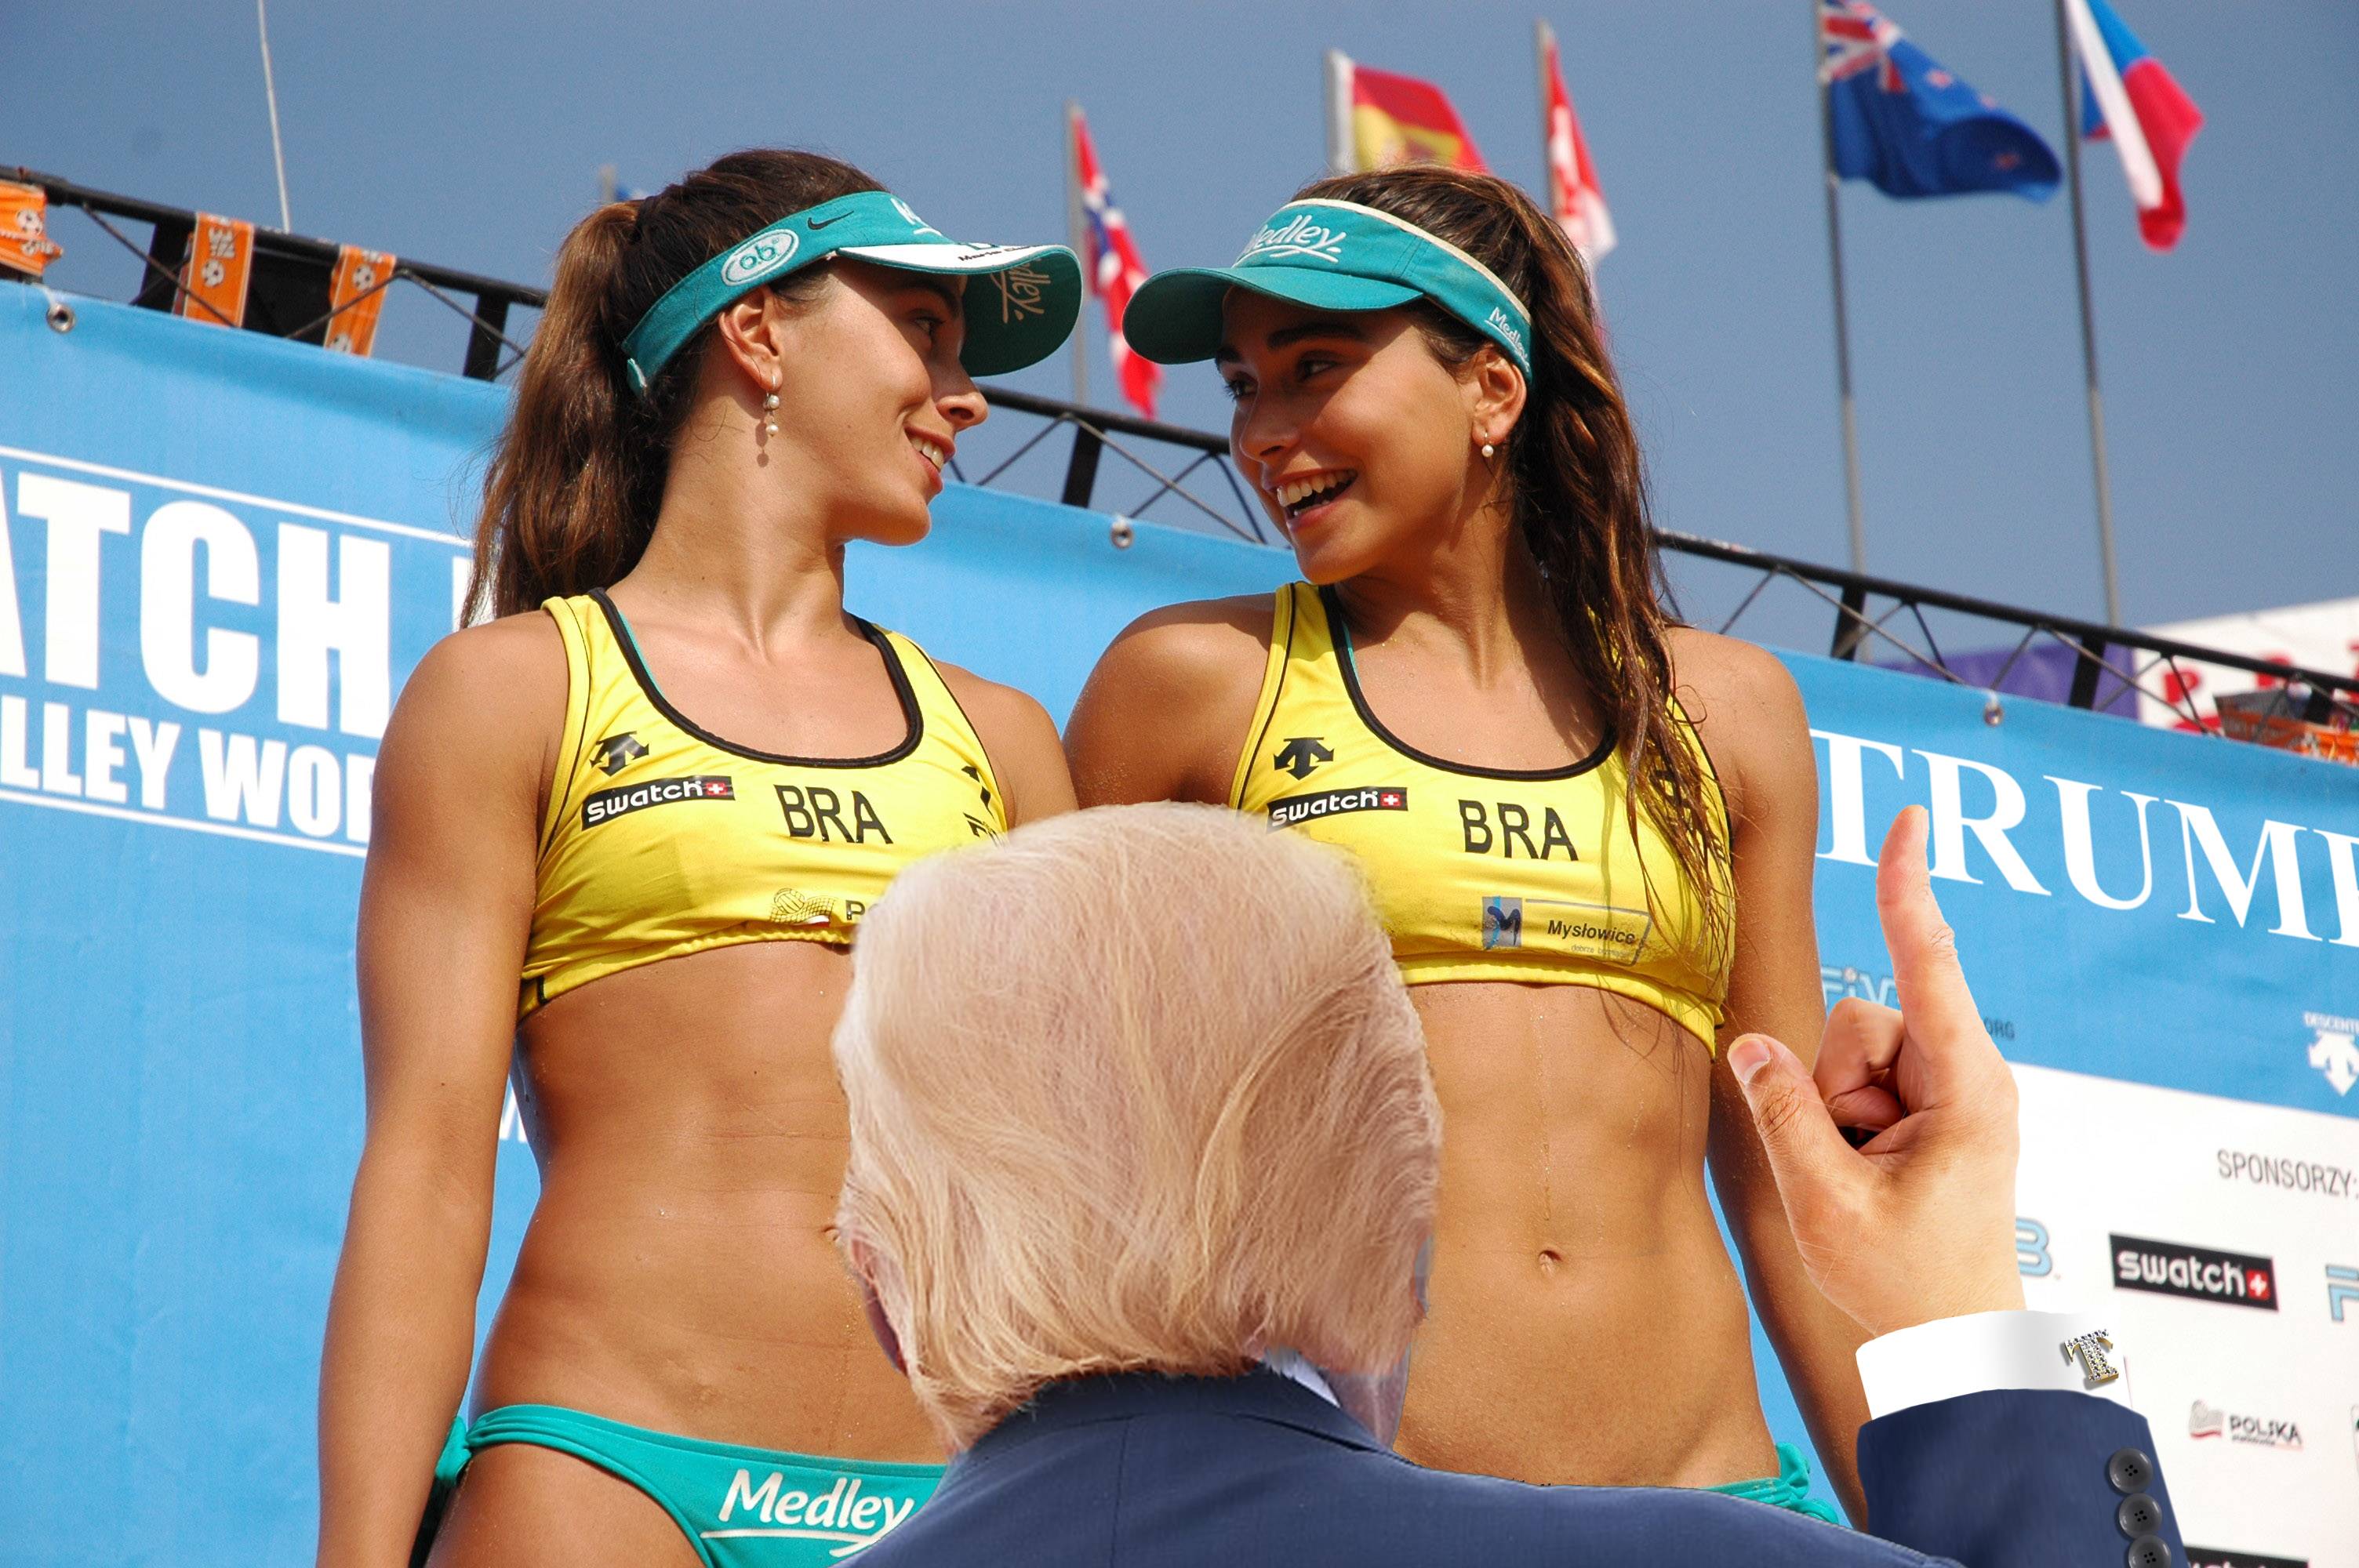 Hot Brazilian Volleyball Players Are Stuck In A Reddit Photoshop Battle